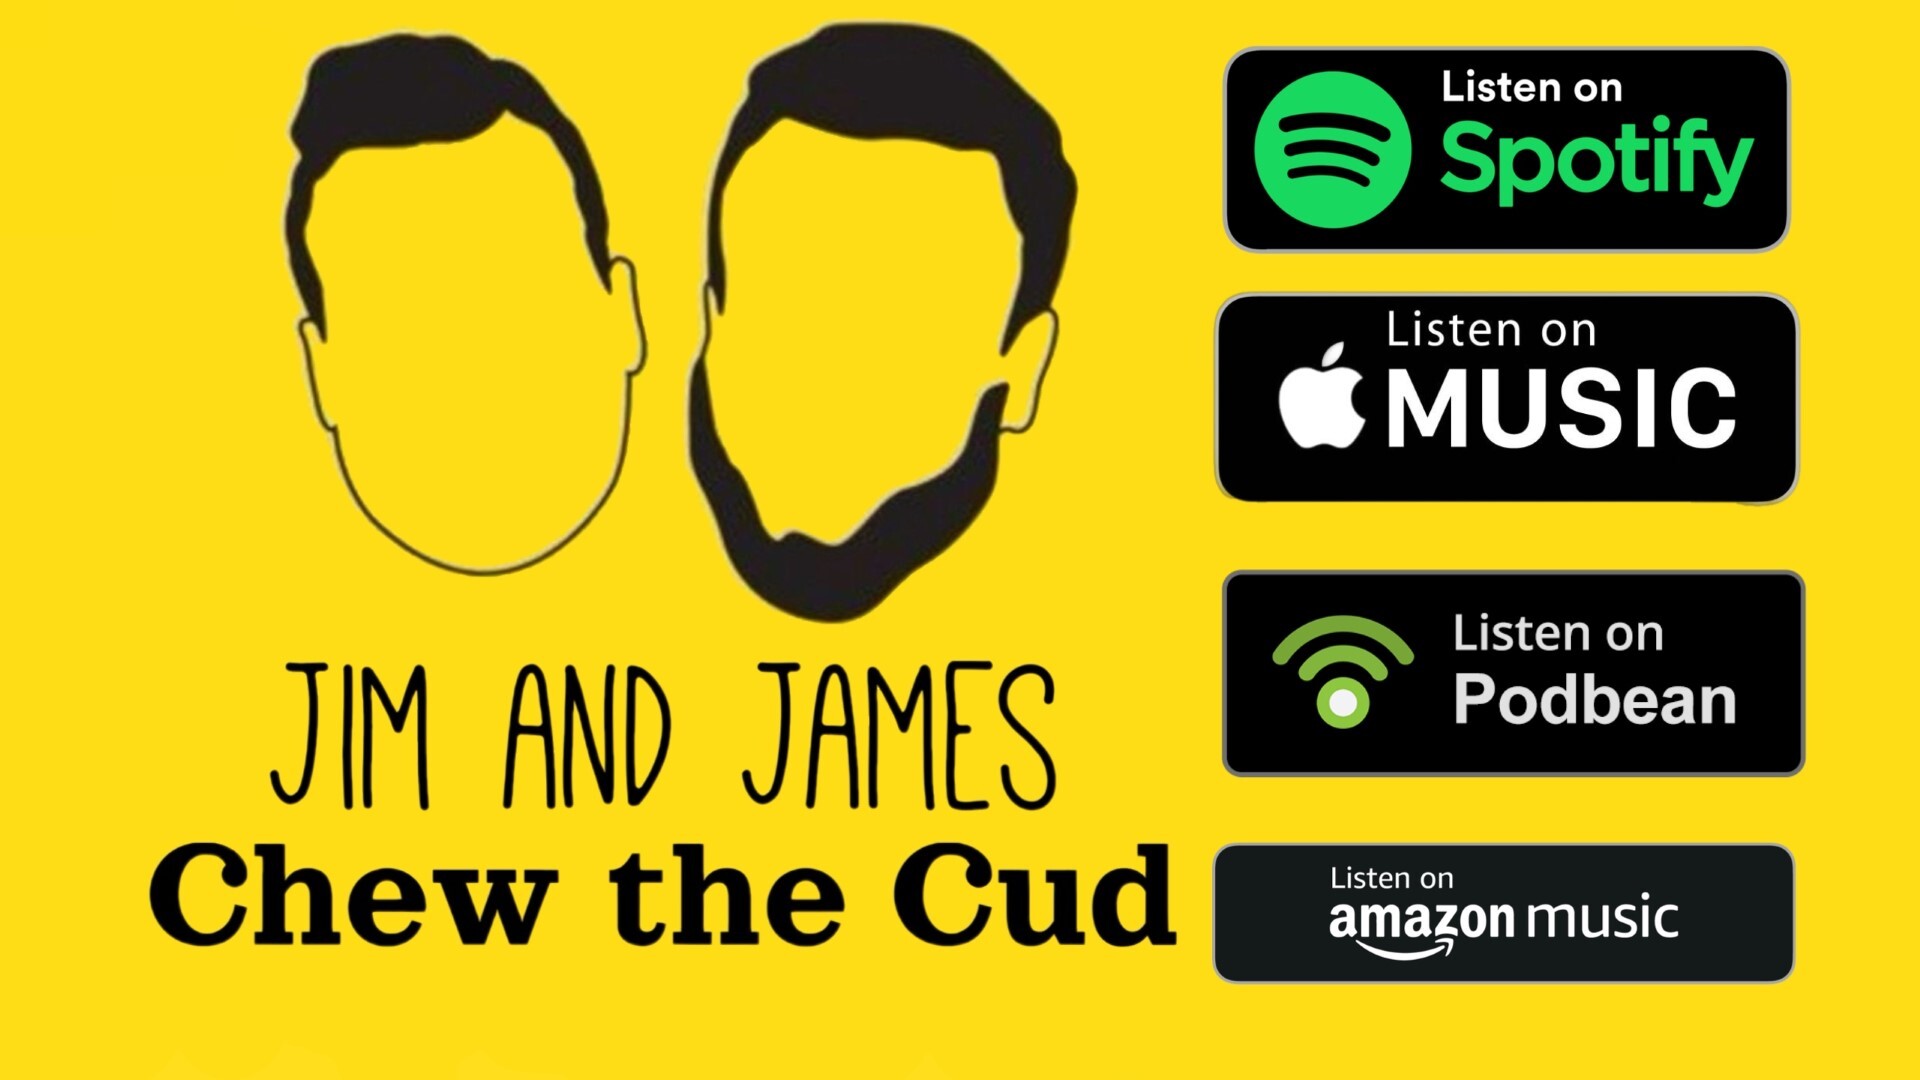 Jim and James Chew the Cud